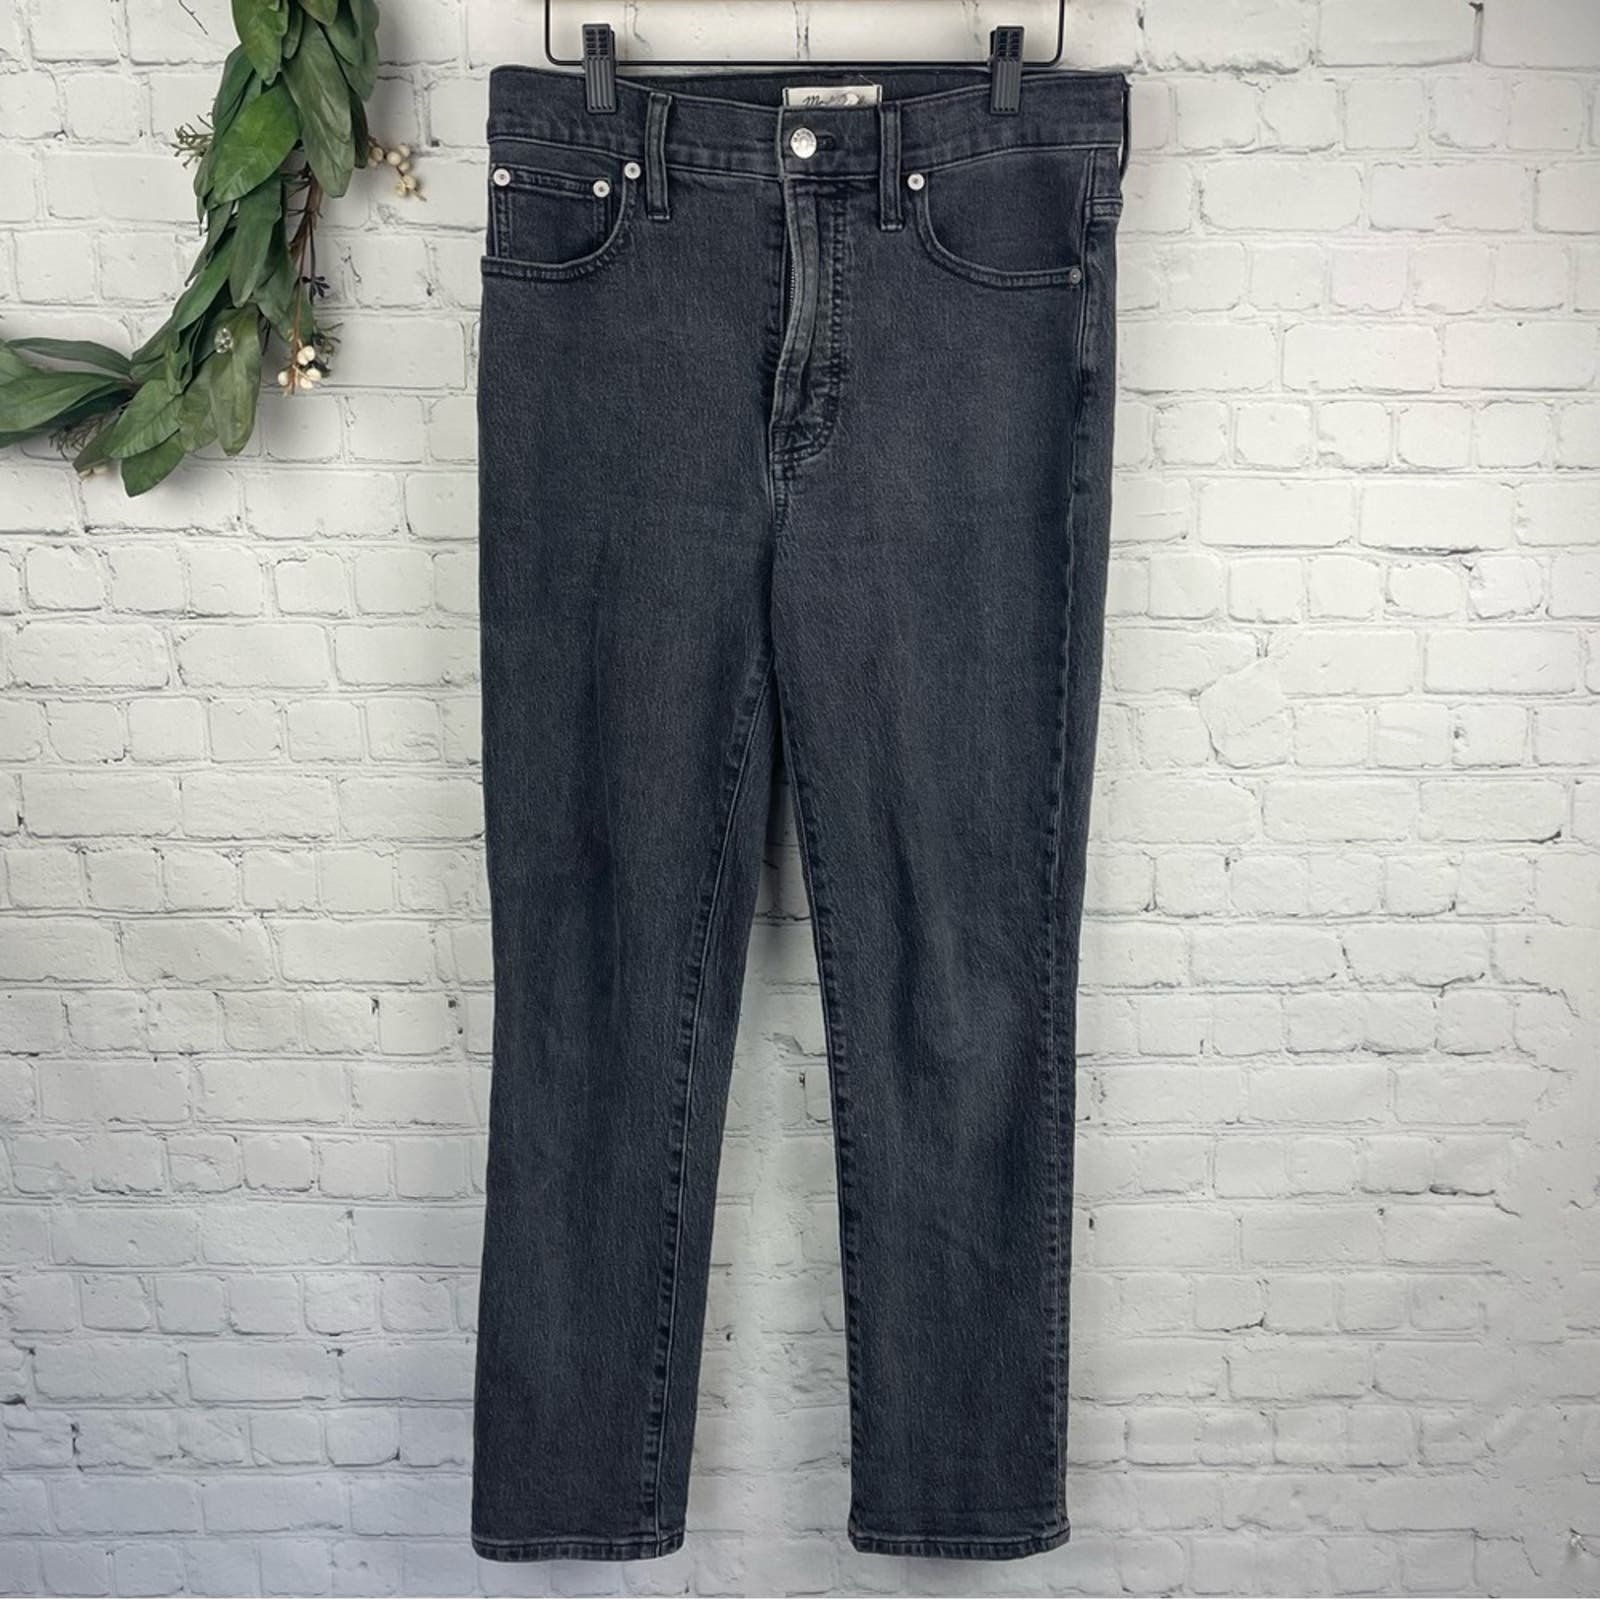 Discounted MADEWELL The Perfect Vintage Jean MD711 Lunar Wash Size 27 mG0jH1Vif US Sale